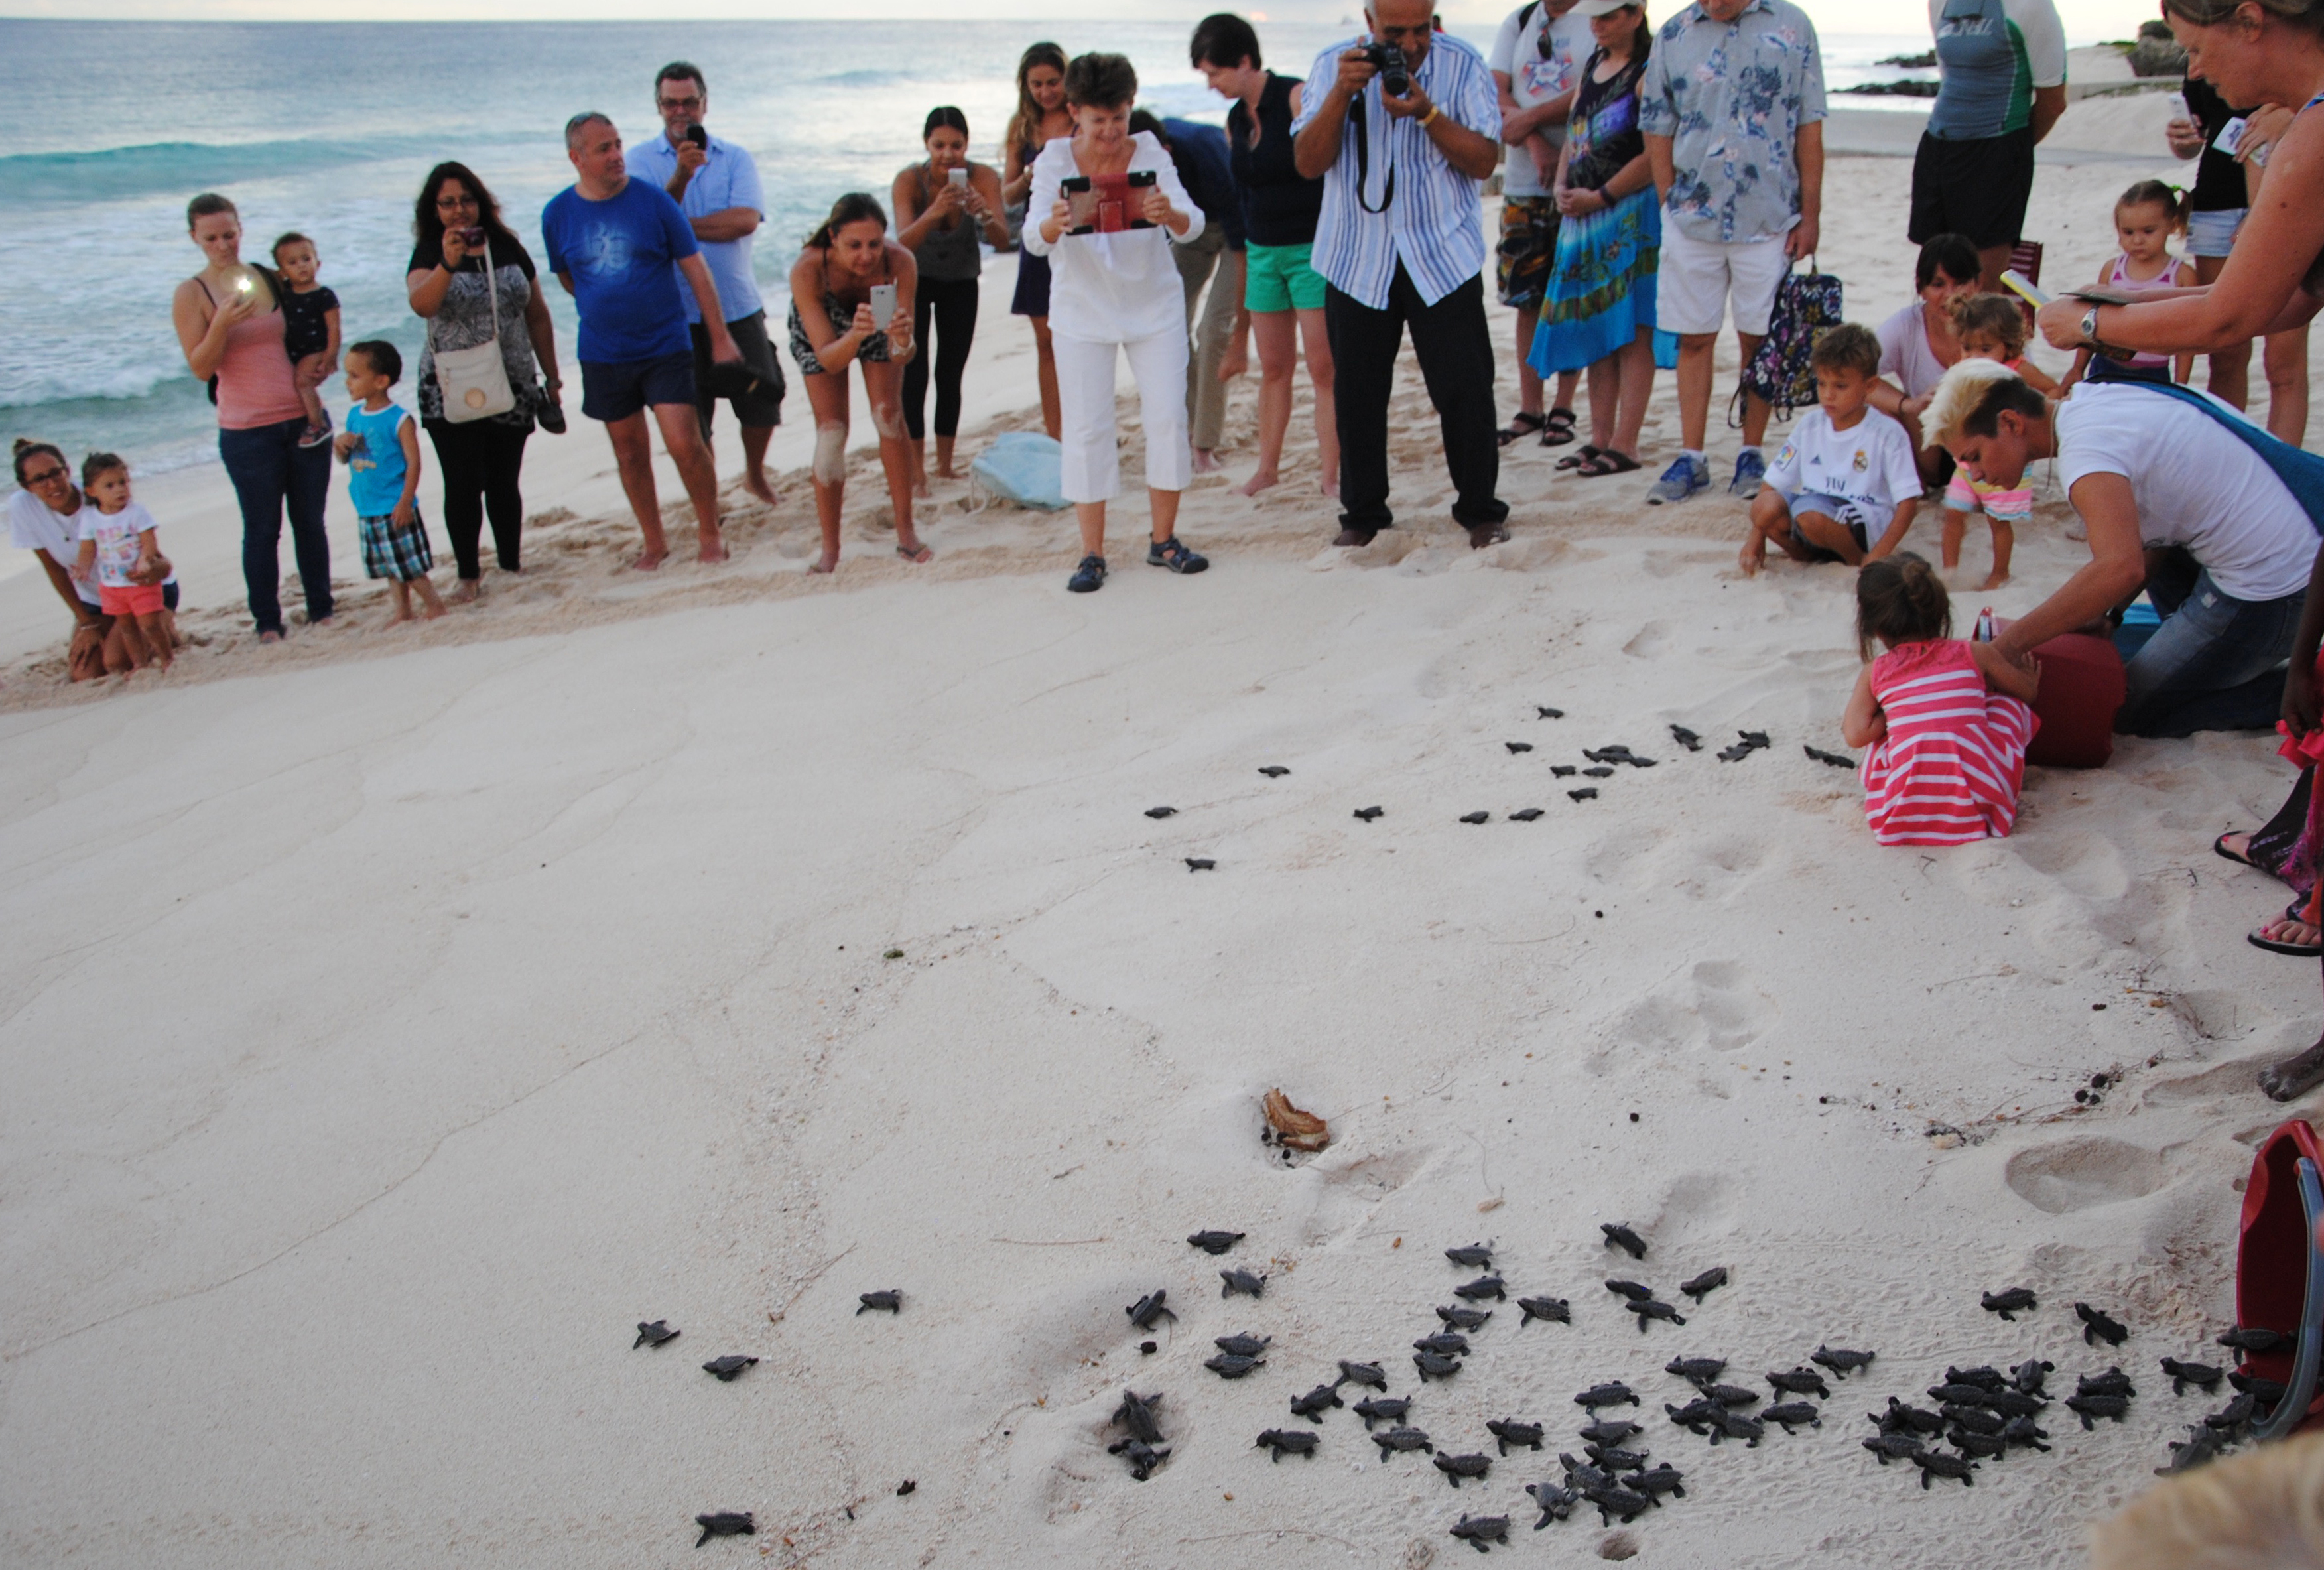 An evening release of hatchlings by the Barbados Sea Turtle Project.